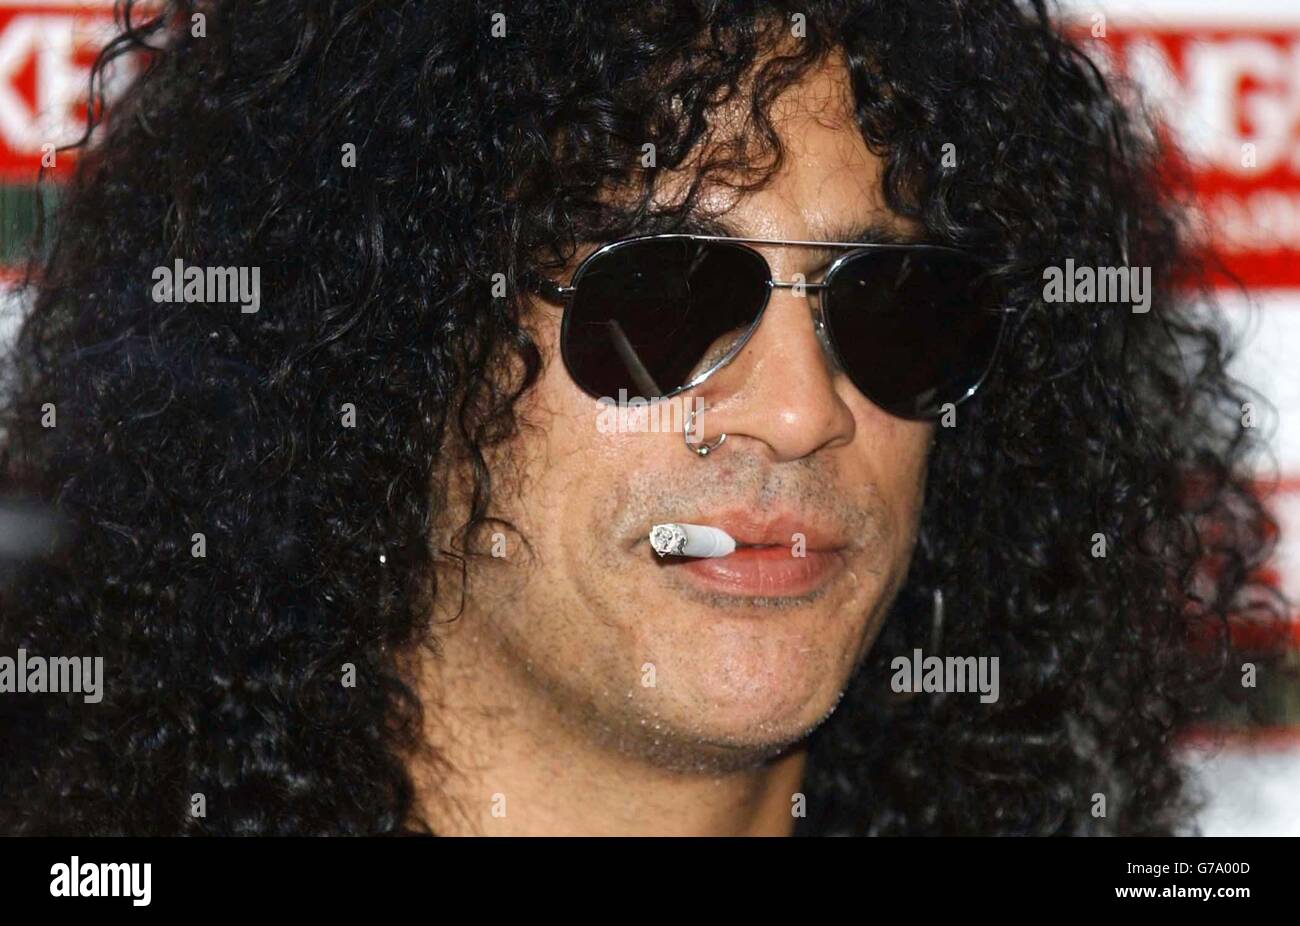 Slash from Velvet Revolver arrives for the 11th annual Kerrang! Awards at The Brewery in east London, organised by the rock music magazine Kerrang!. Stock Photo